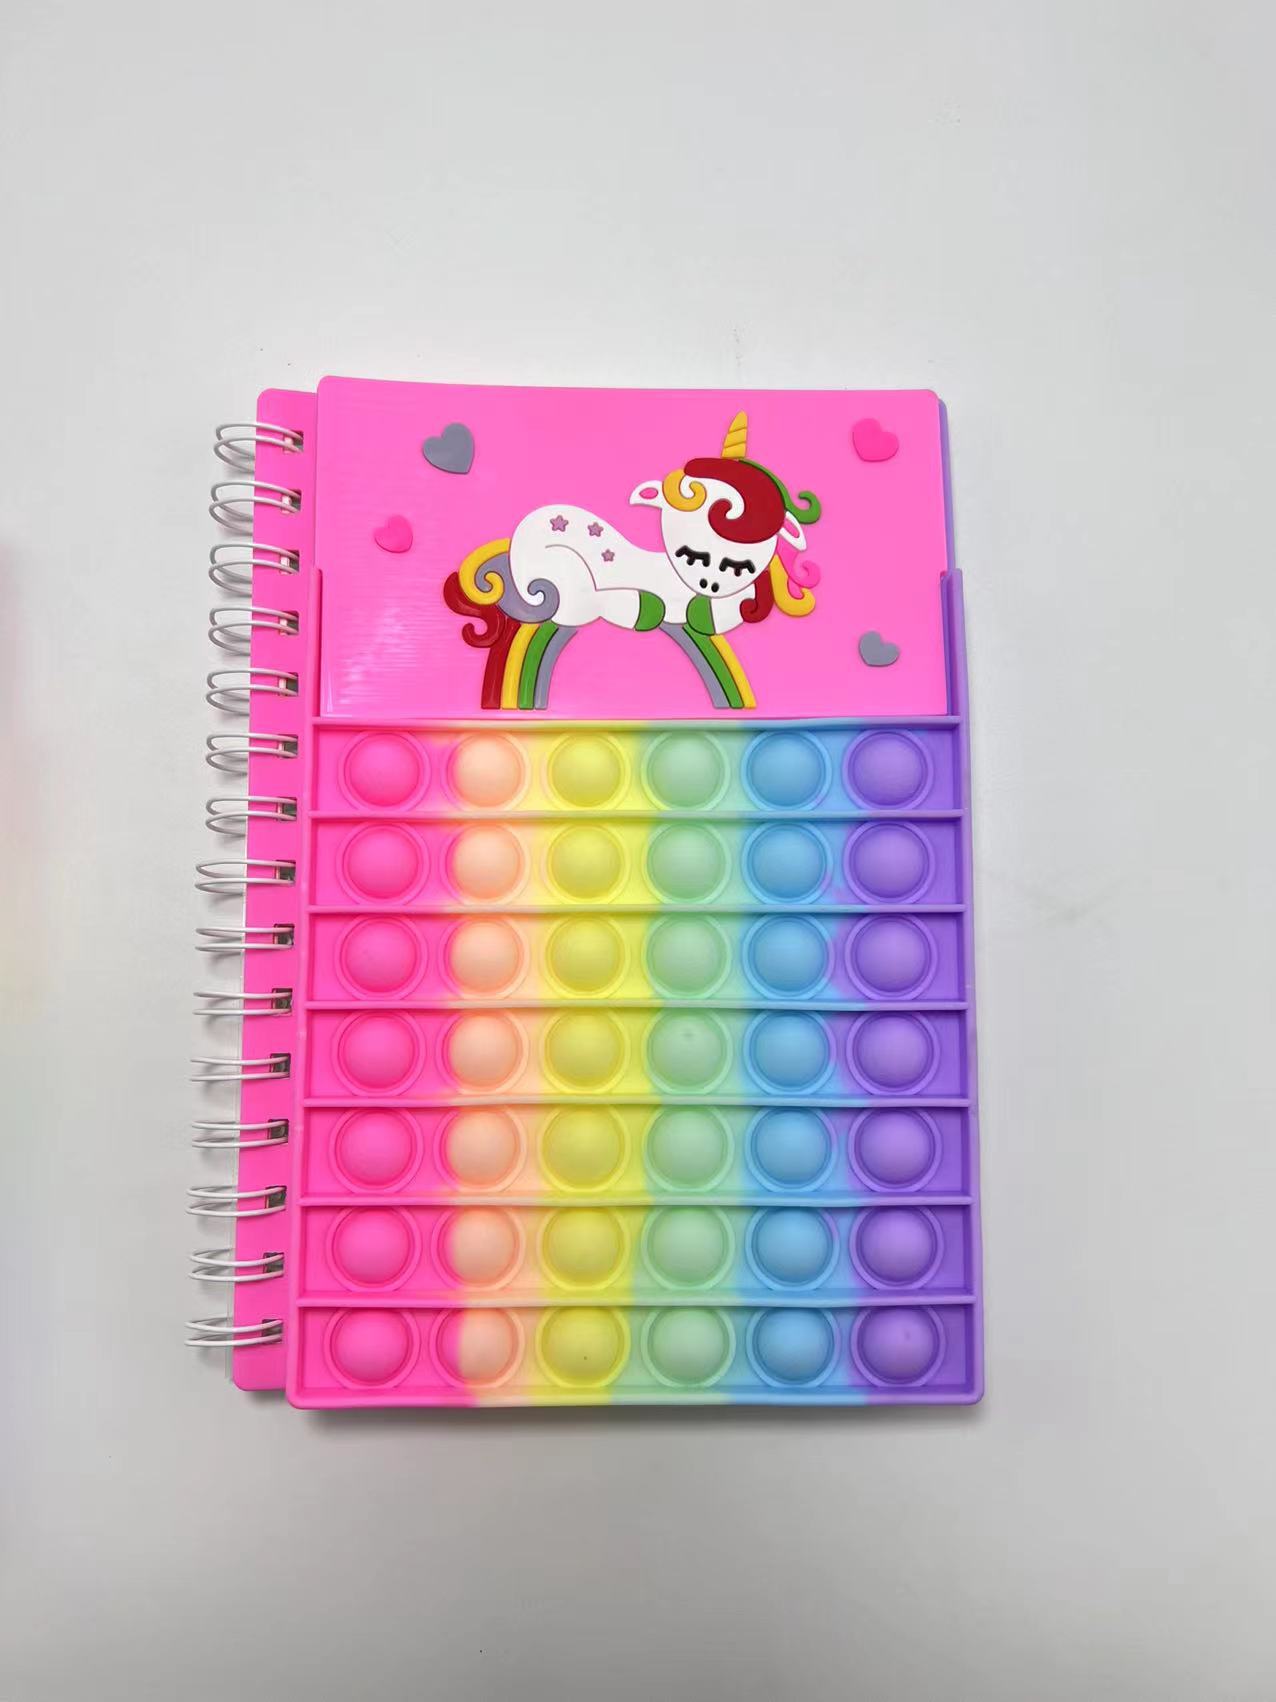 Decompression Press Silicone Deratization Pioneer Bubble Music A5 Cartoon Notebook Journal Coil Notebook Notepad